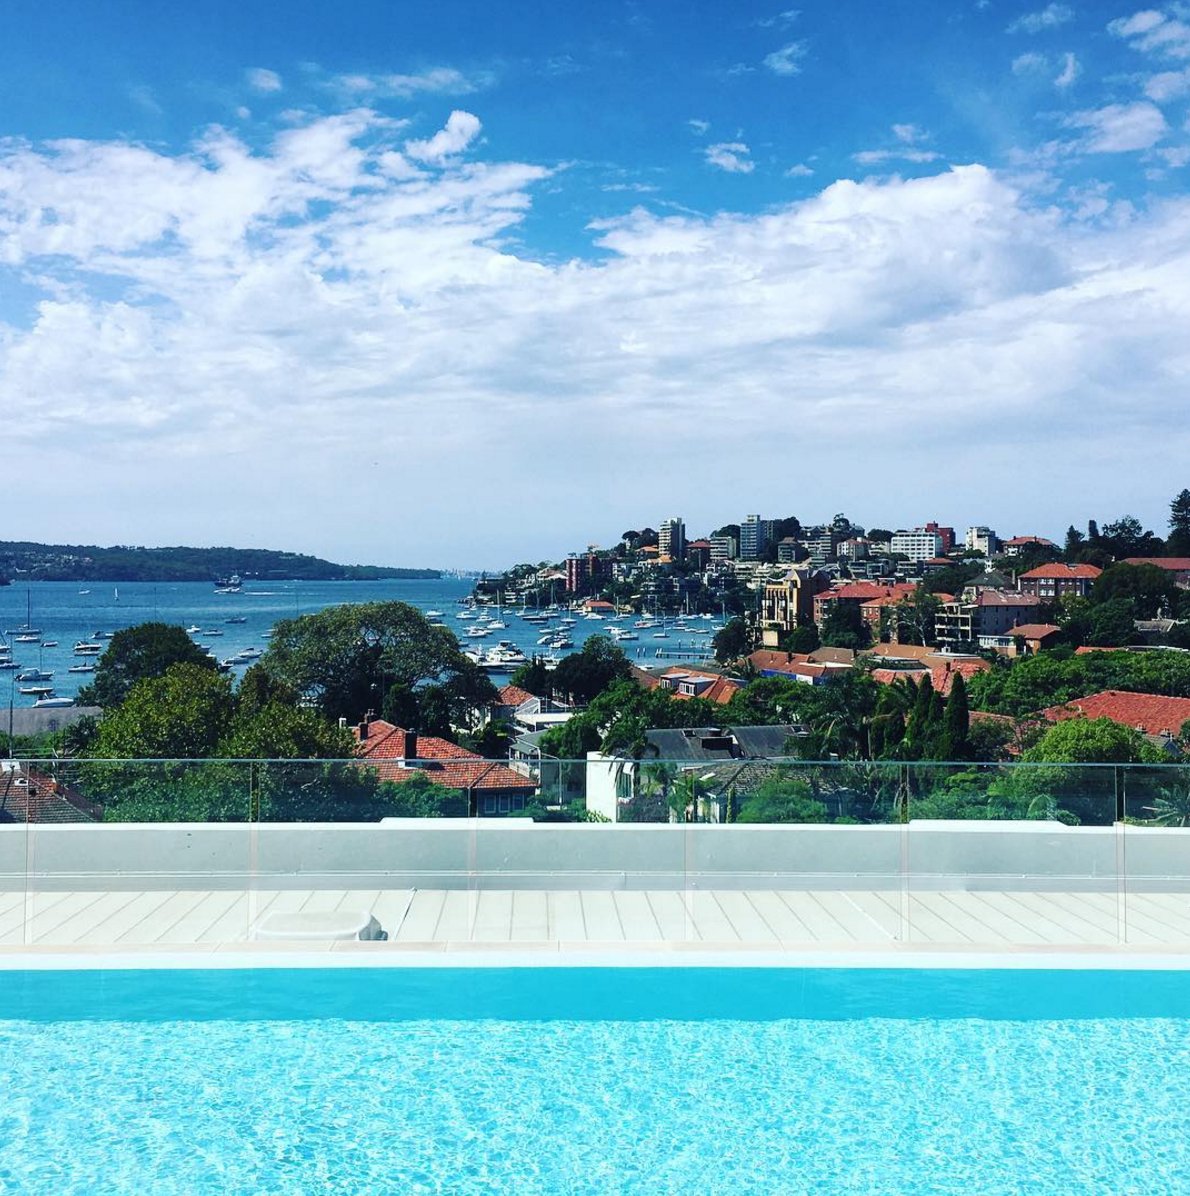 Dreaming of sunnier days...#rainraingoaway
IG Photo by bcwylie77 #rooftopdoublebay #waitingforsunshine